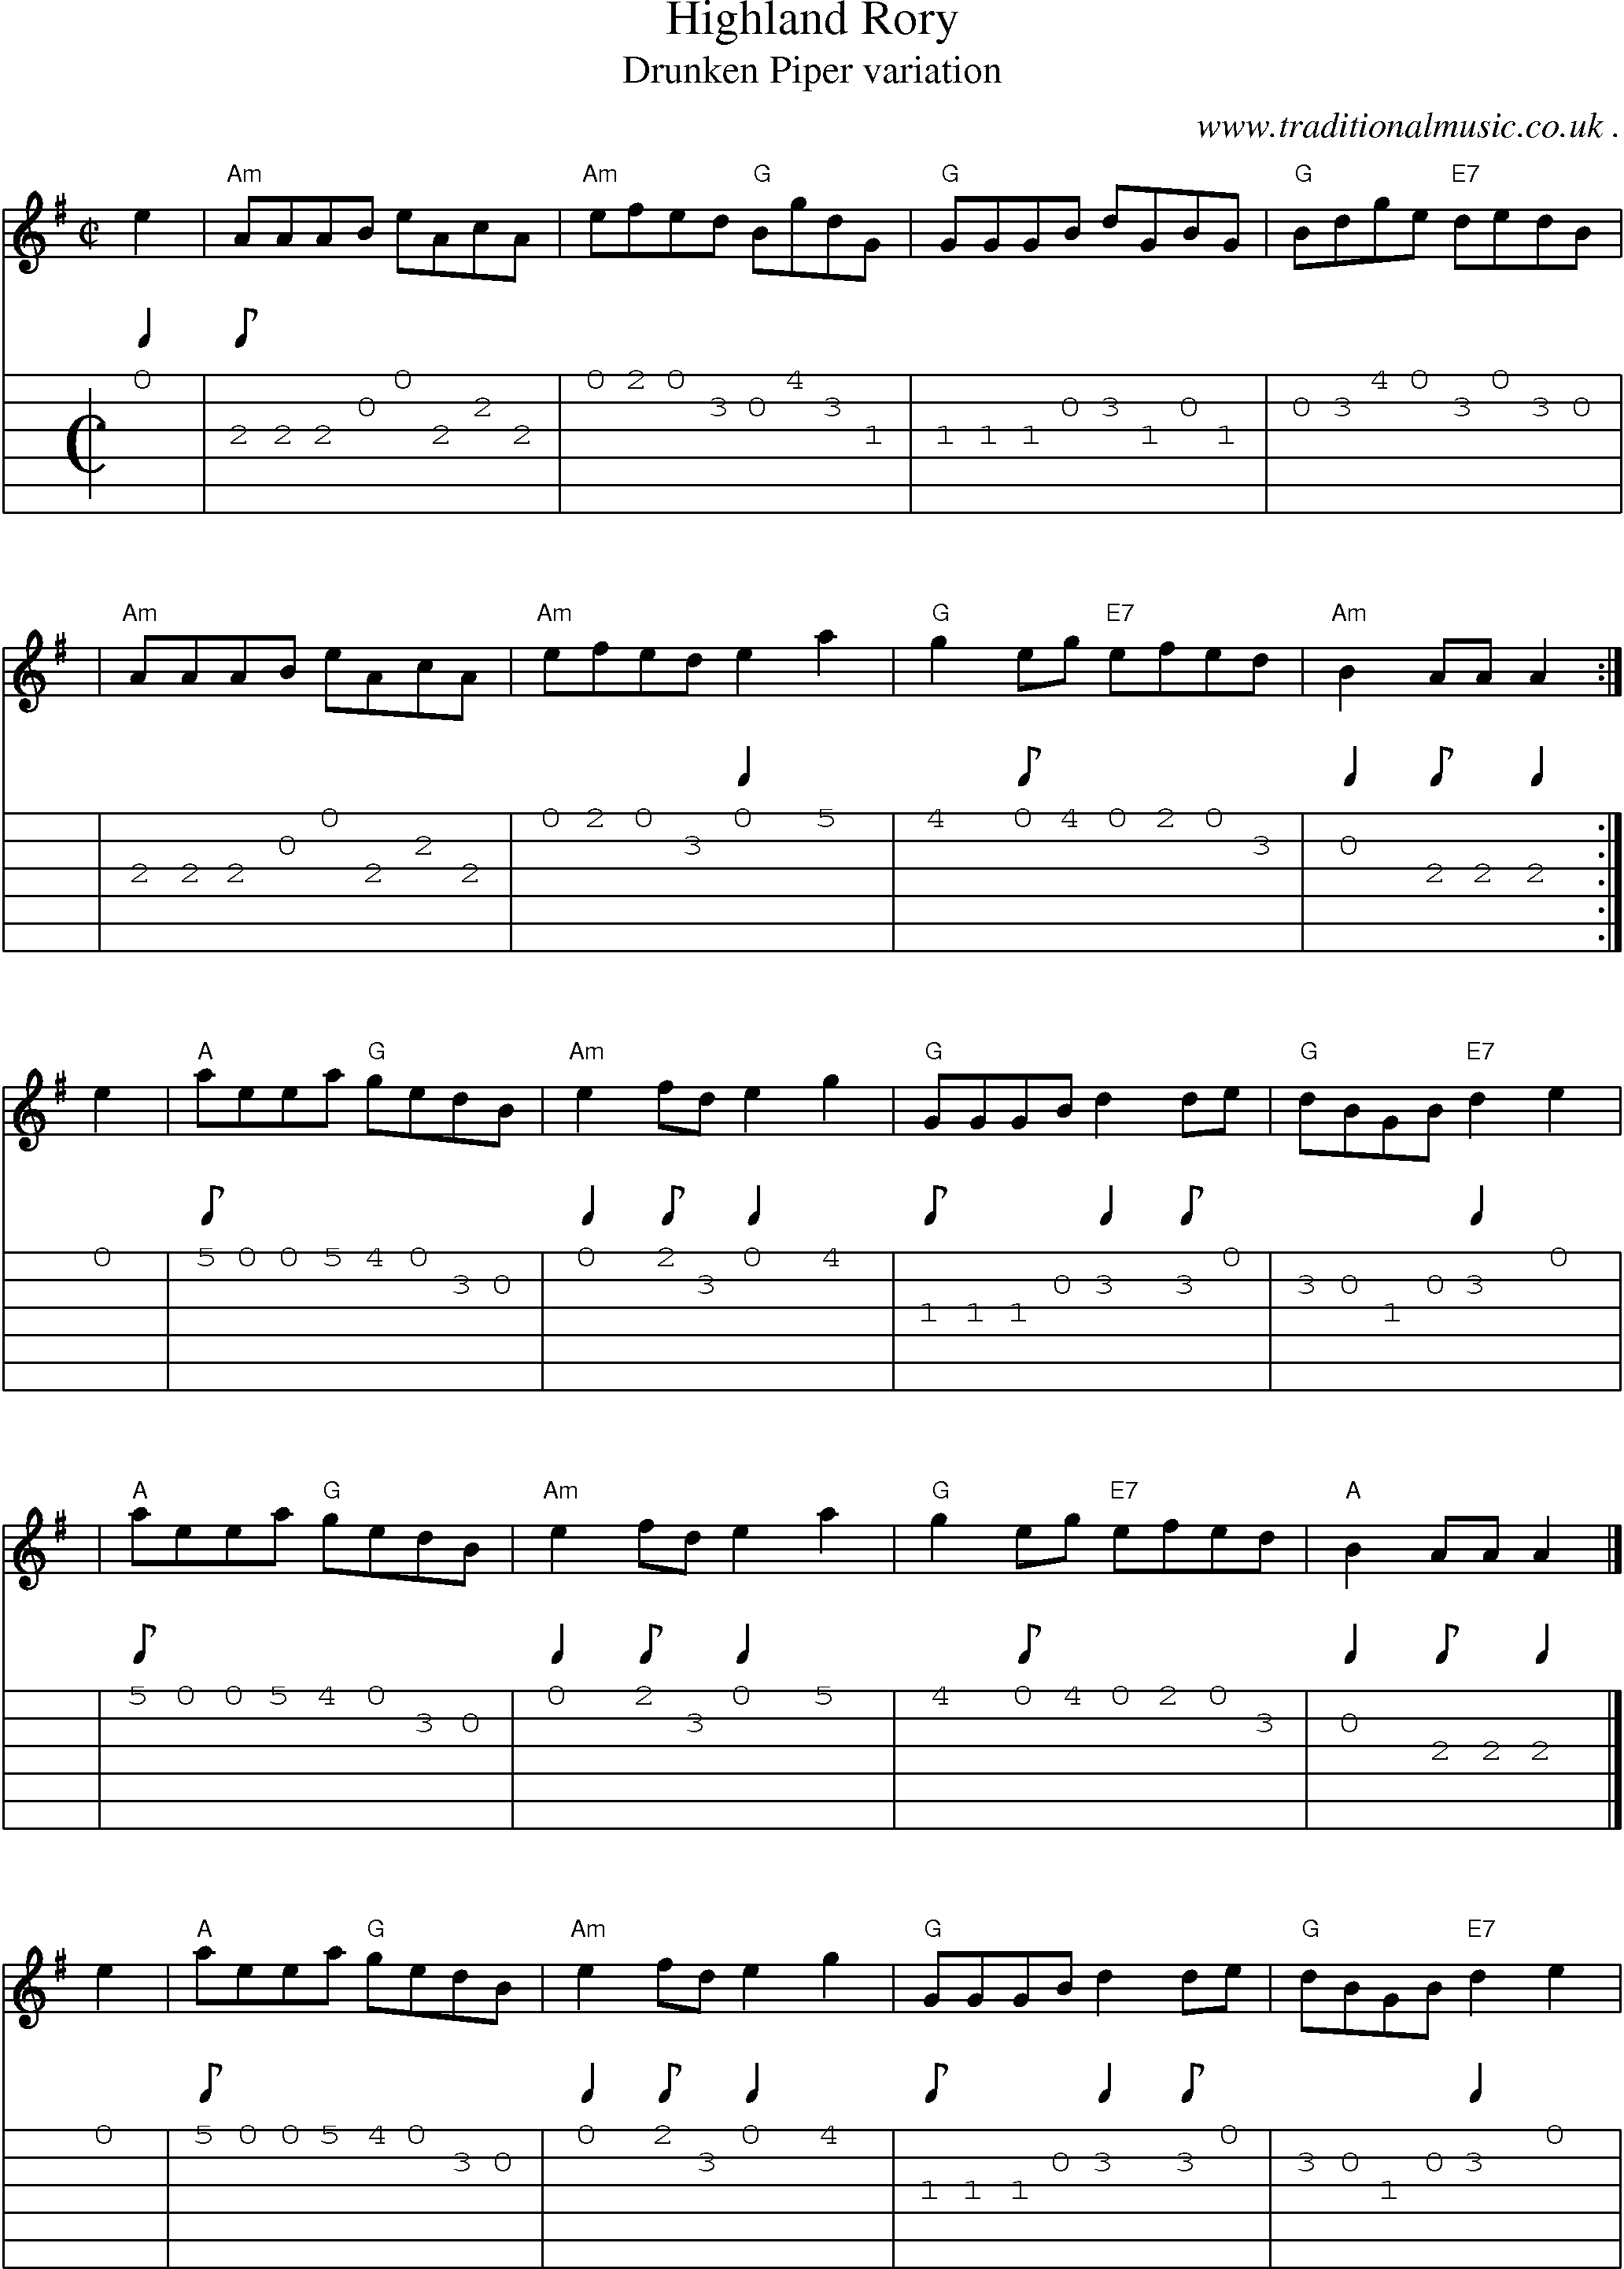 Sheet-music  score, Chords and Guitar Tabs for Highland Rory